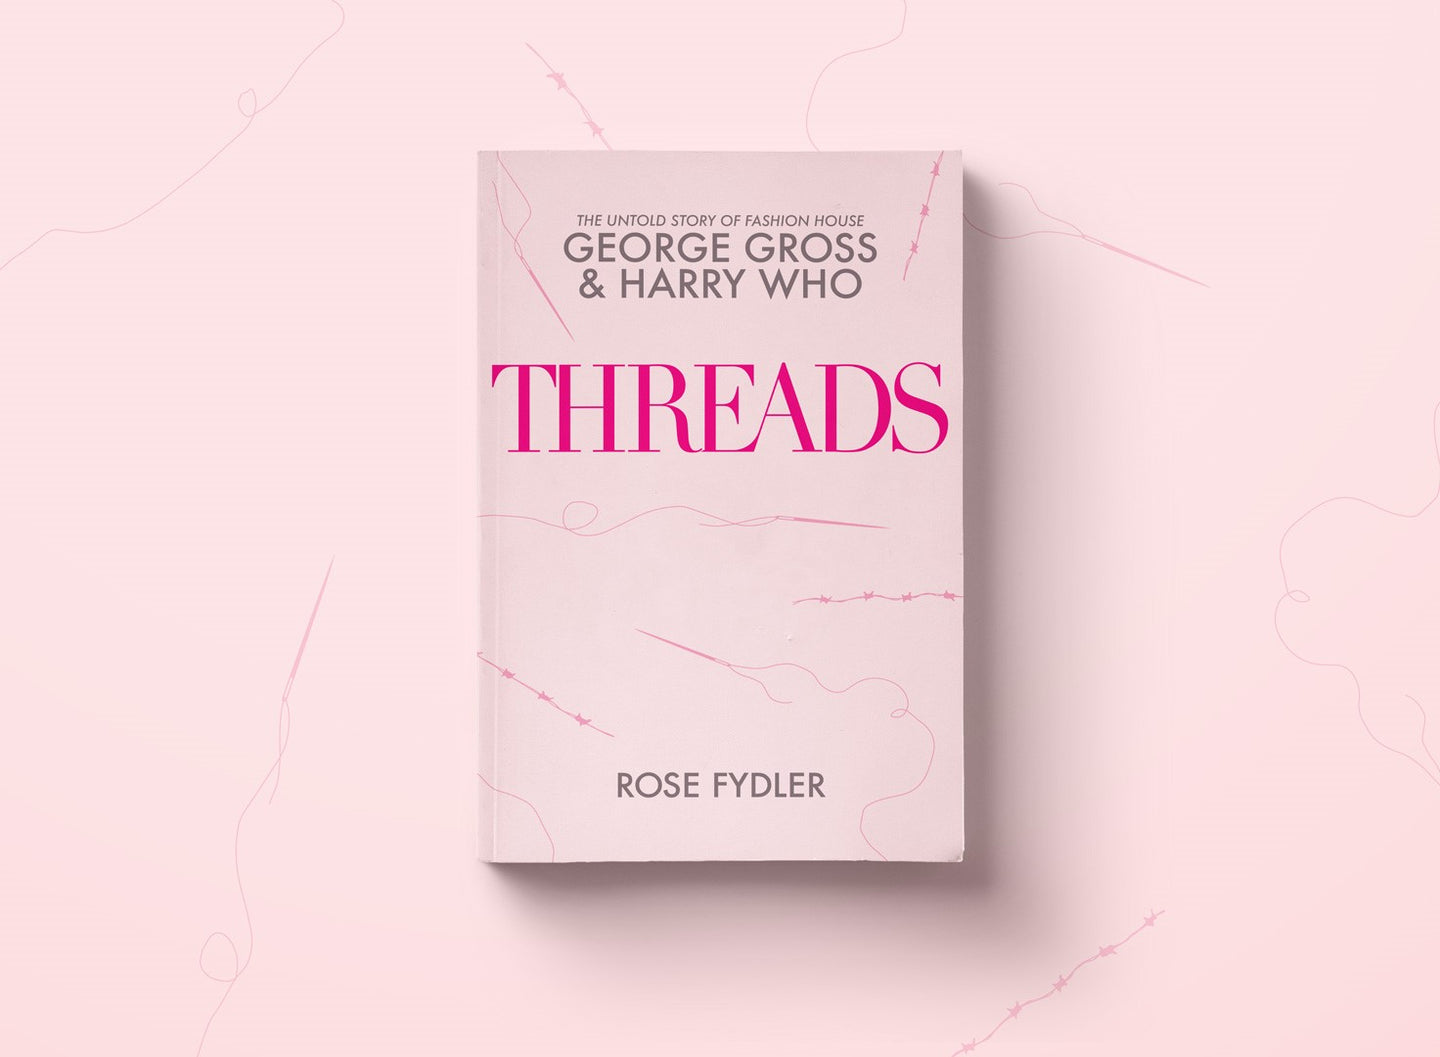 threads - George Gross Book - Harry Who Book